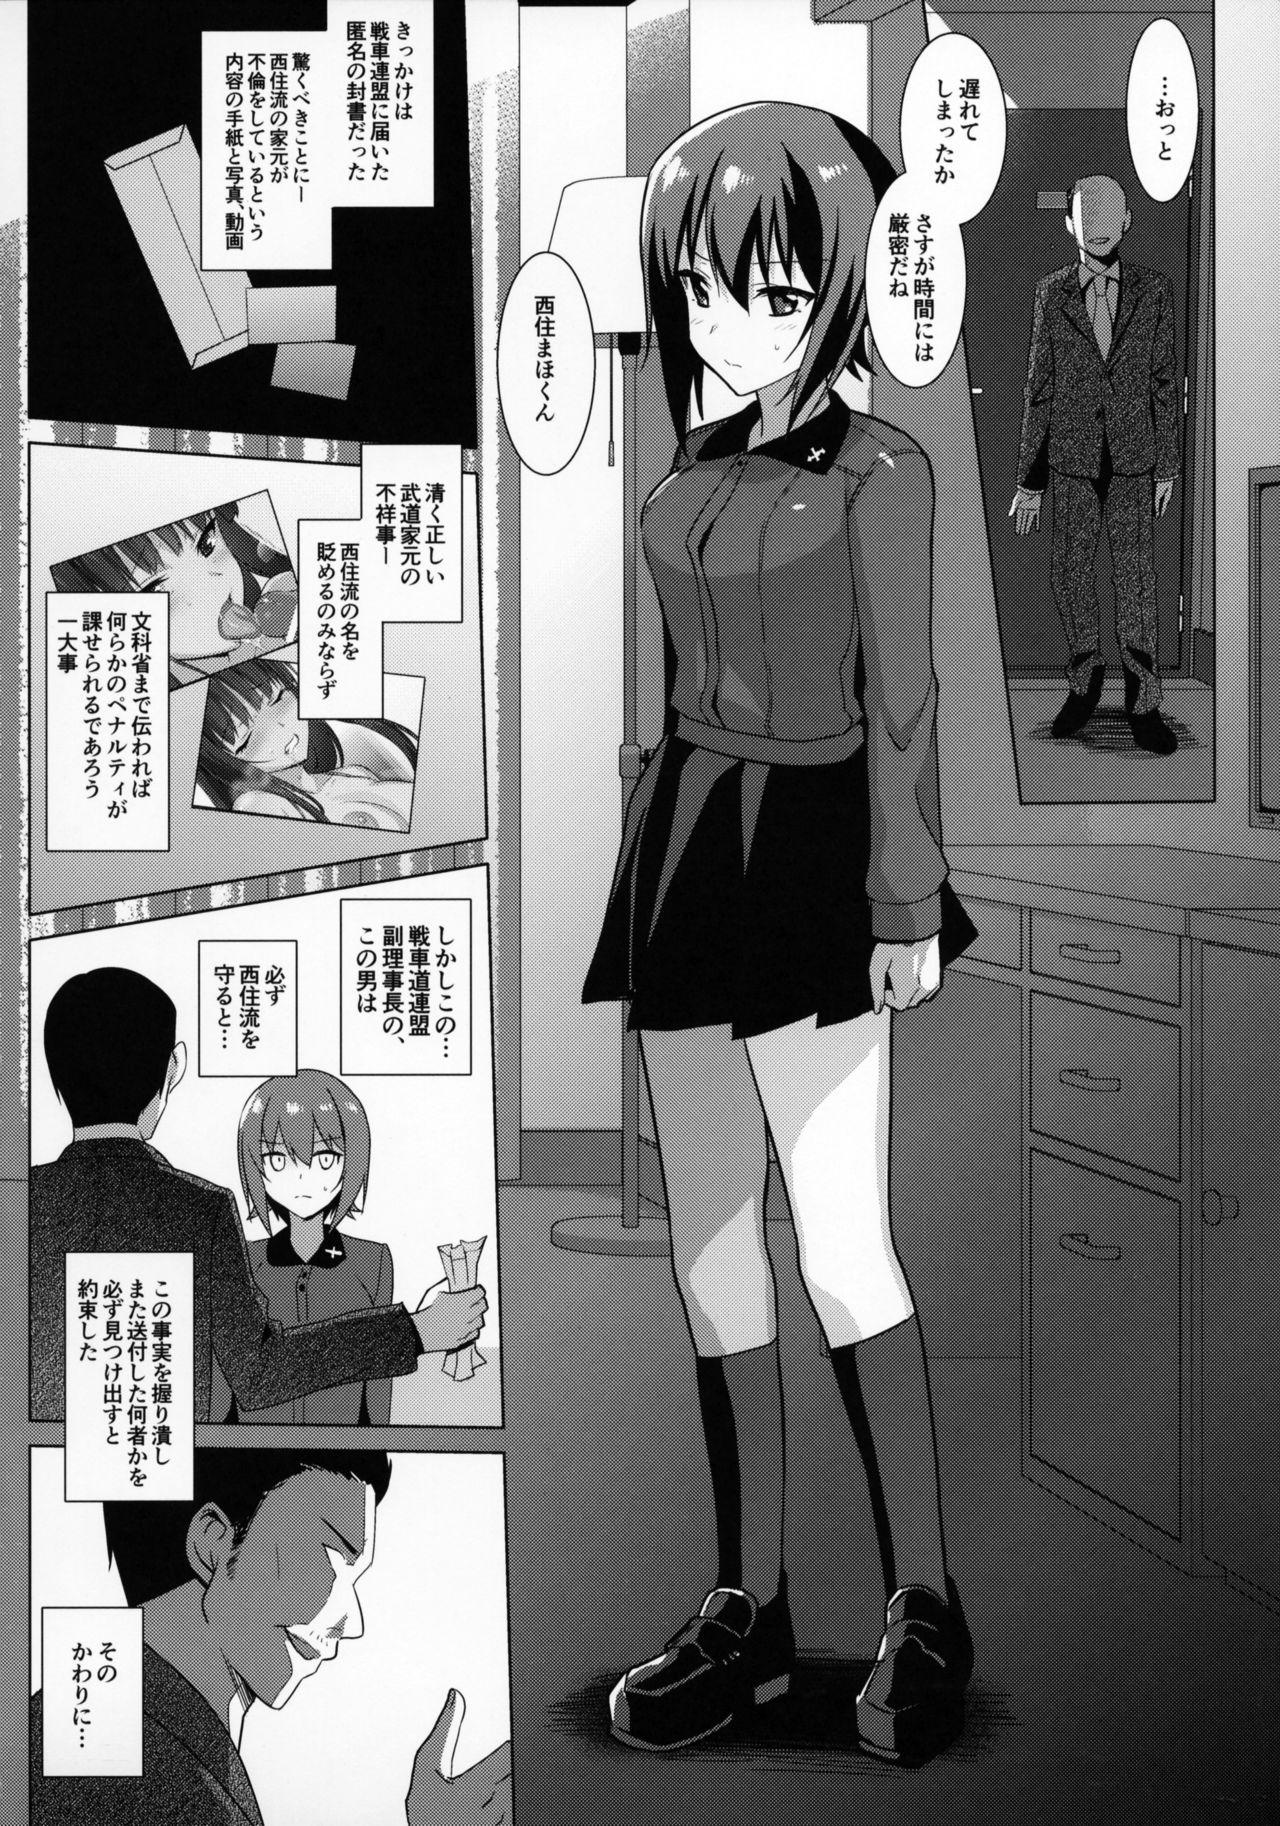 Housewife LET ME DIE - Girls und panzer Coroa - Page 5